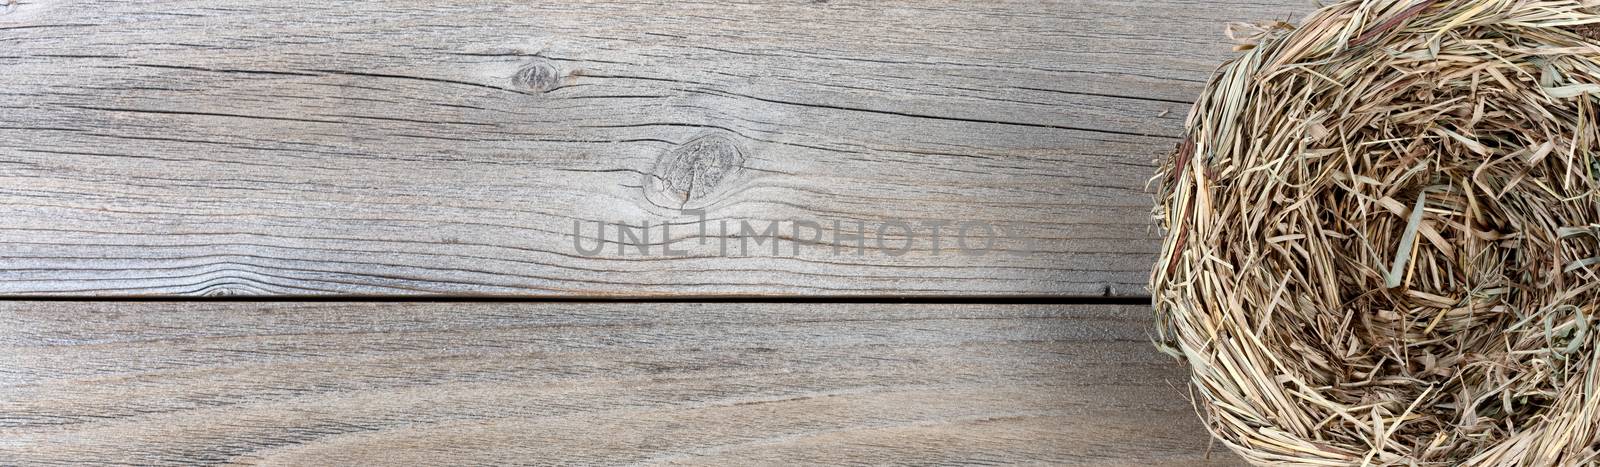 Natural bird nest on weathered wooden boards  by tab1962